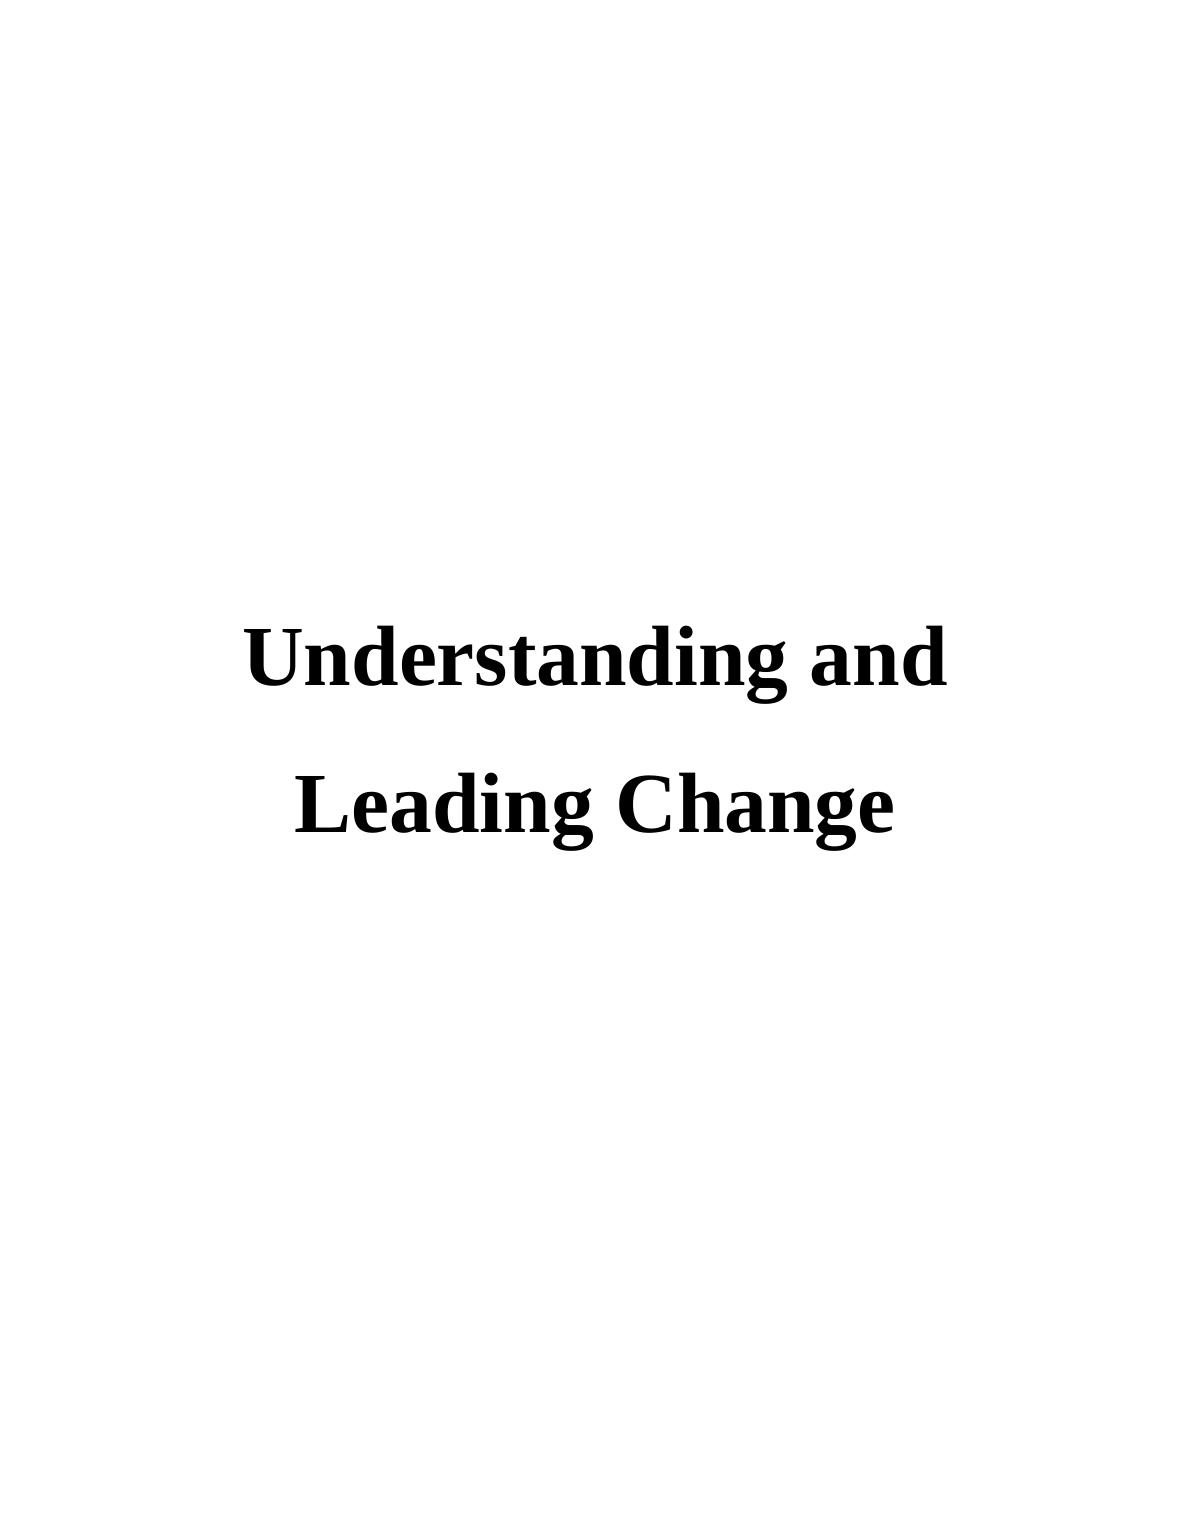 Understanding and Leading Change Assignment Sample_1